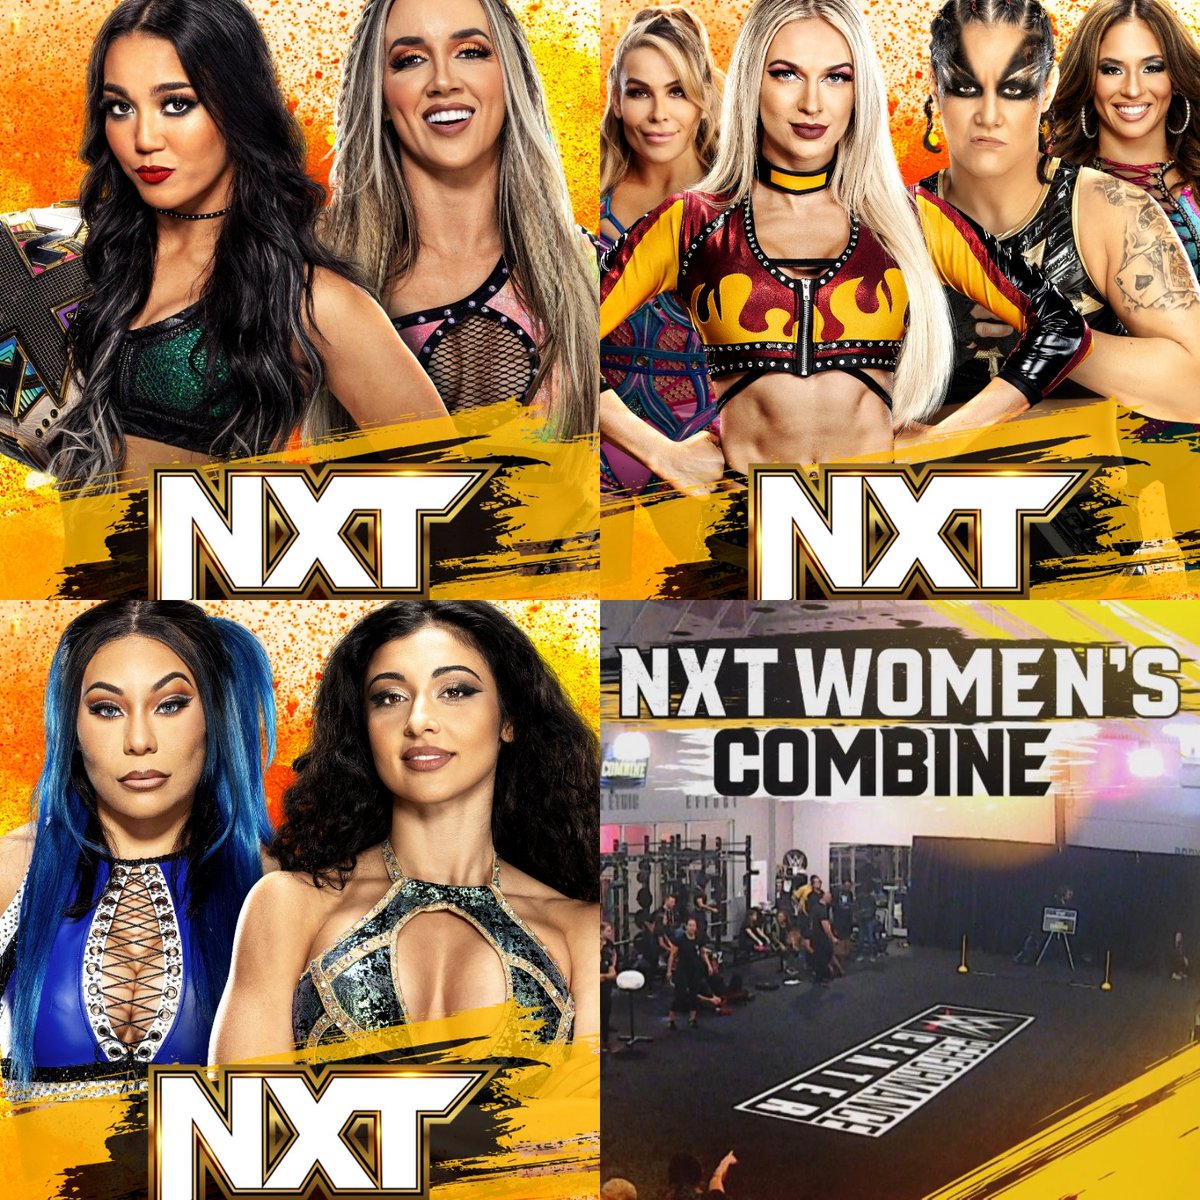 nxt women's championship match
two singles matches
women's combine to determine qualifying matches for the nxt women's north american championship ladder match

shawn michaels just knows how to use women the way they should on weekly tv & showcase them in many ways